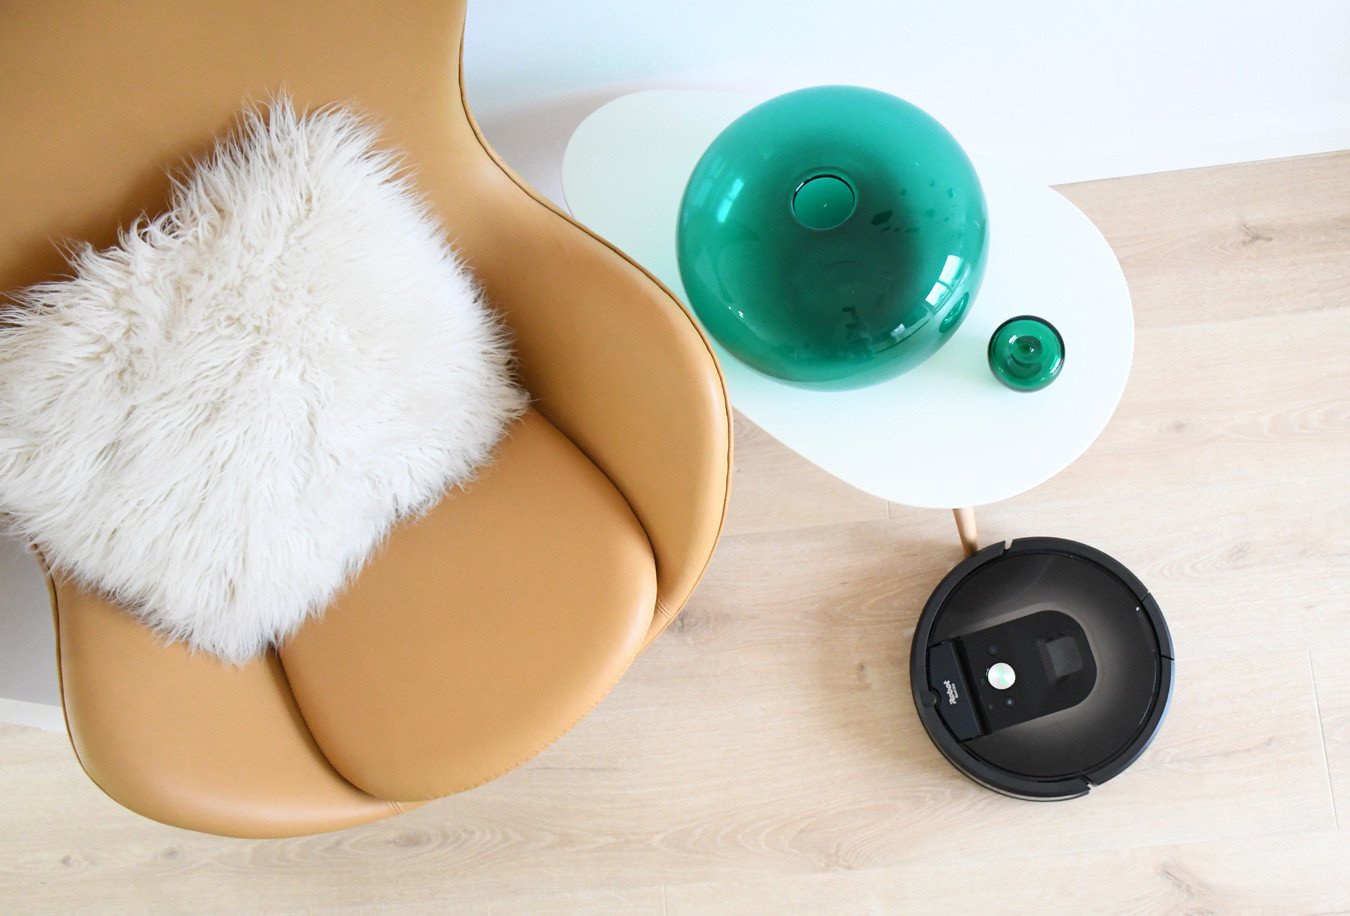 Romba review: trying out the Roomba iRobot 980 robot vacuum cleaner